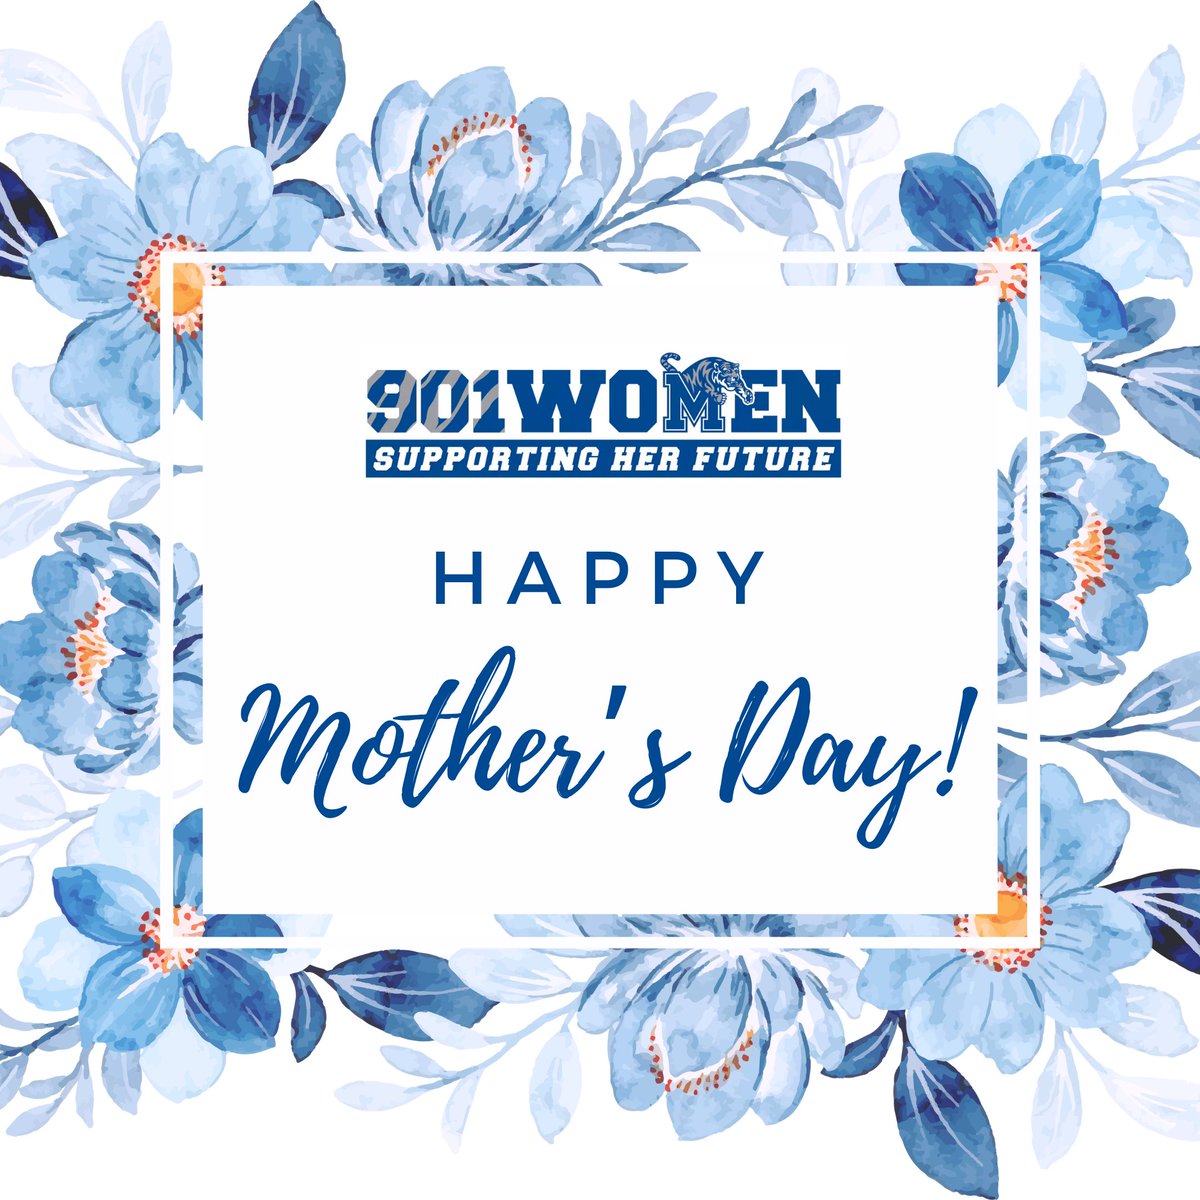 Wishing all the amazing moms out there a Happy Mother's Day! 💐 Thank you for being our biggest cheerleaders both on and off the field!

#901Women #UofM #GoTigersGo #UniversityofMemphis #UniversityofMemphisSports #UniversityofMemphisWomensAthletics #WomenInSports #FemaleAthletes